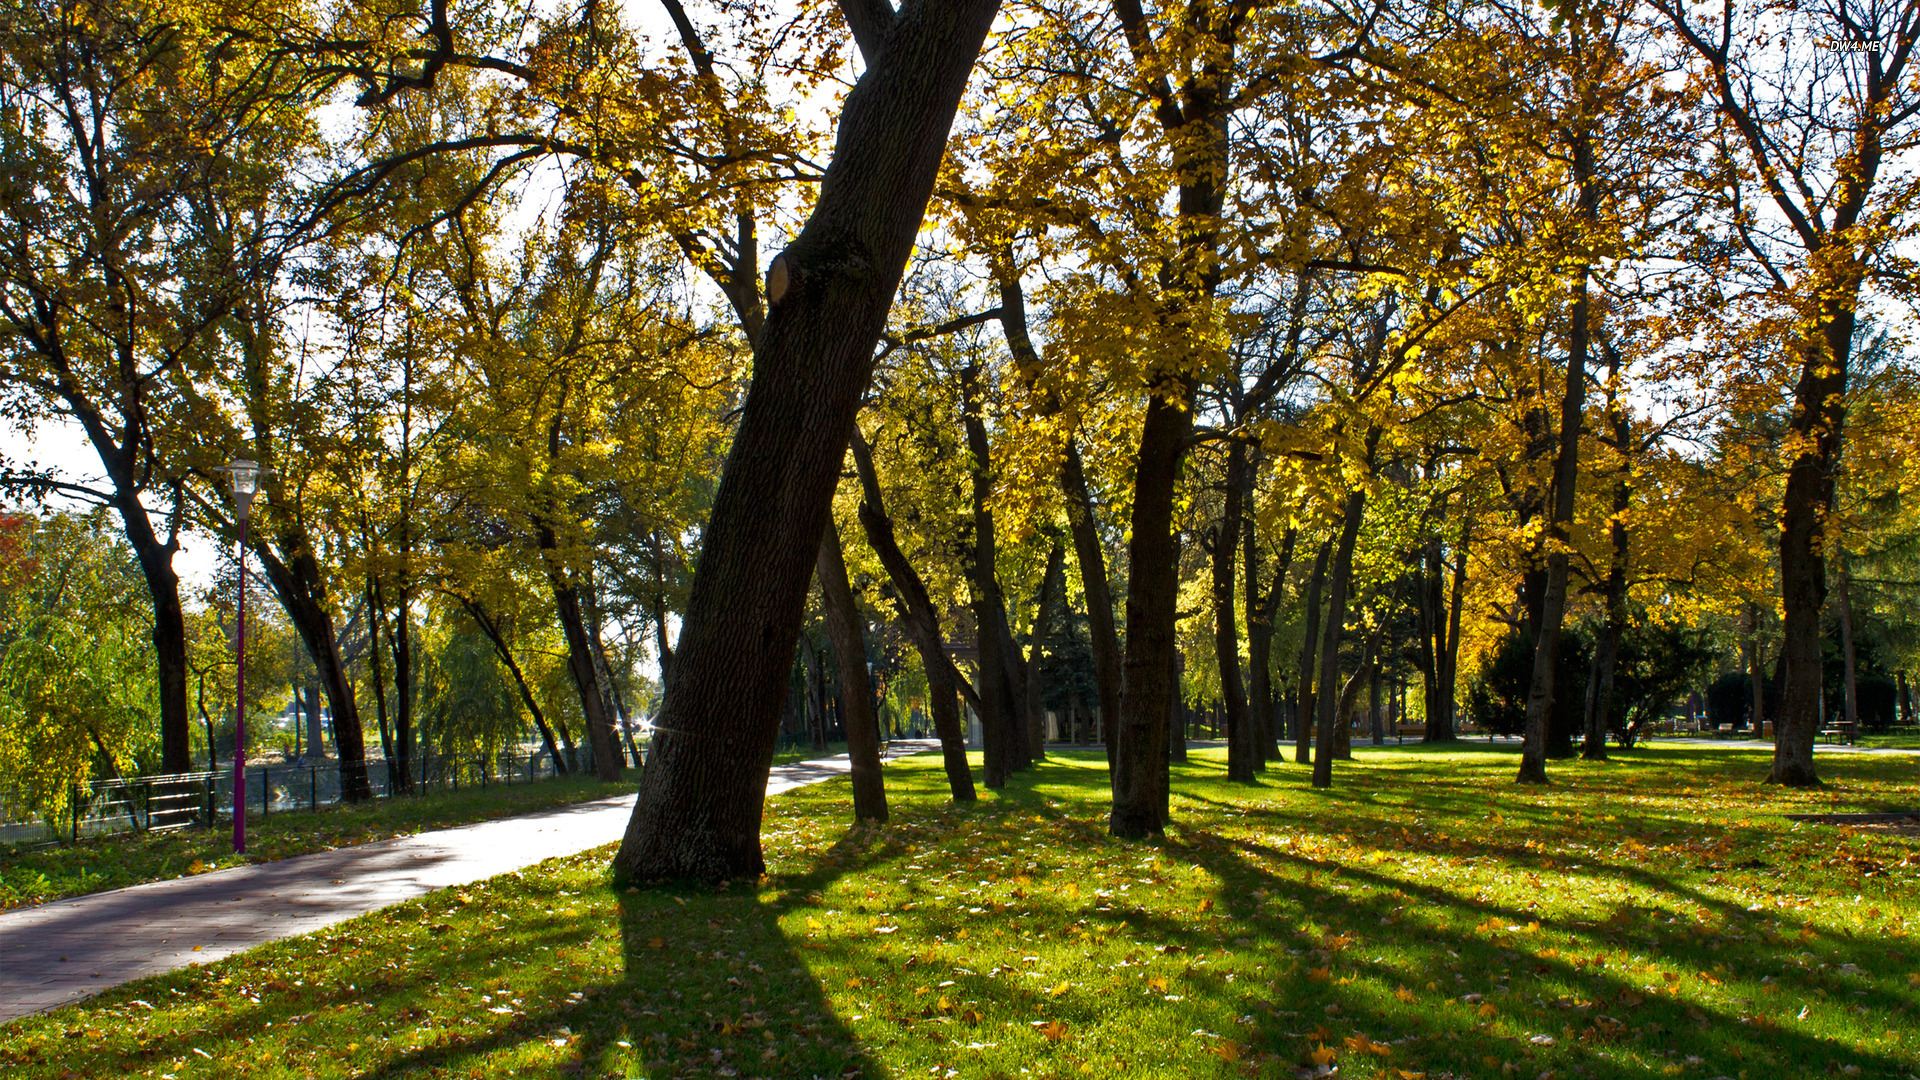 Sunny Autumn Day In The Park Wallpaper